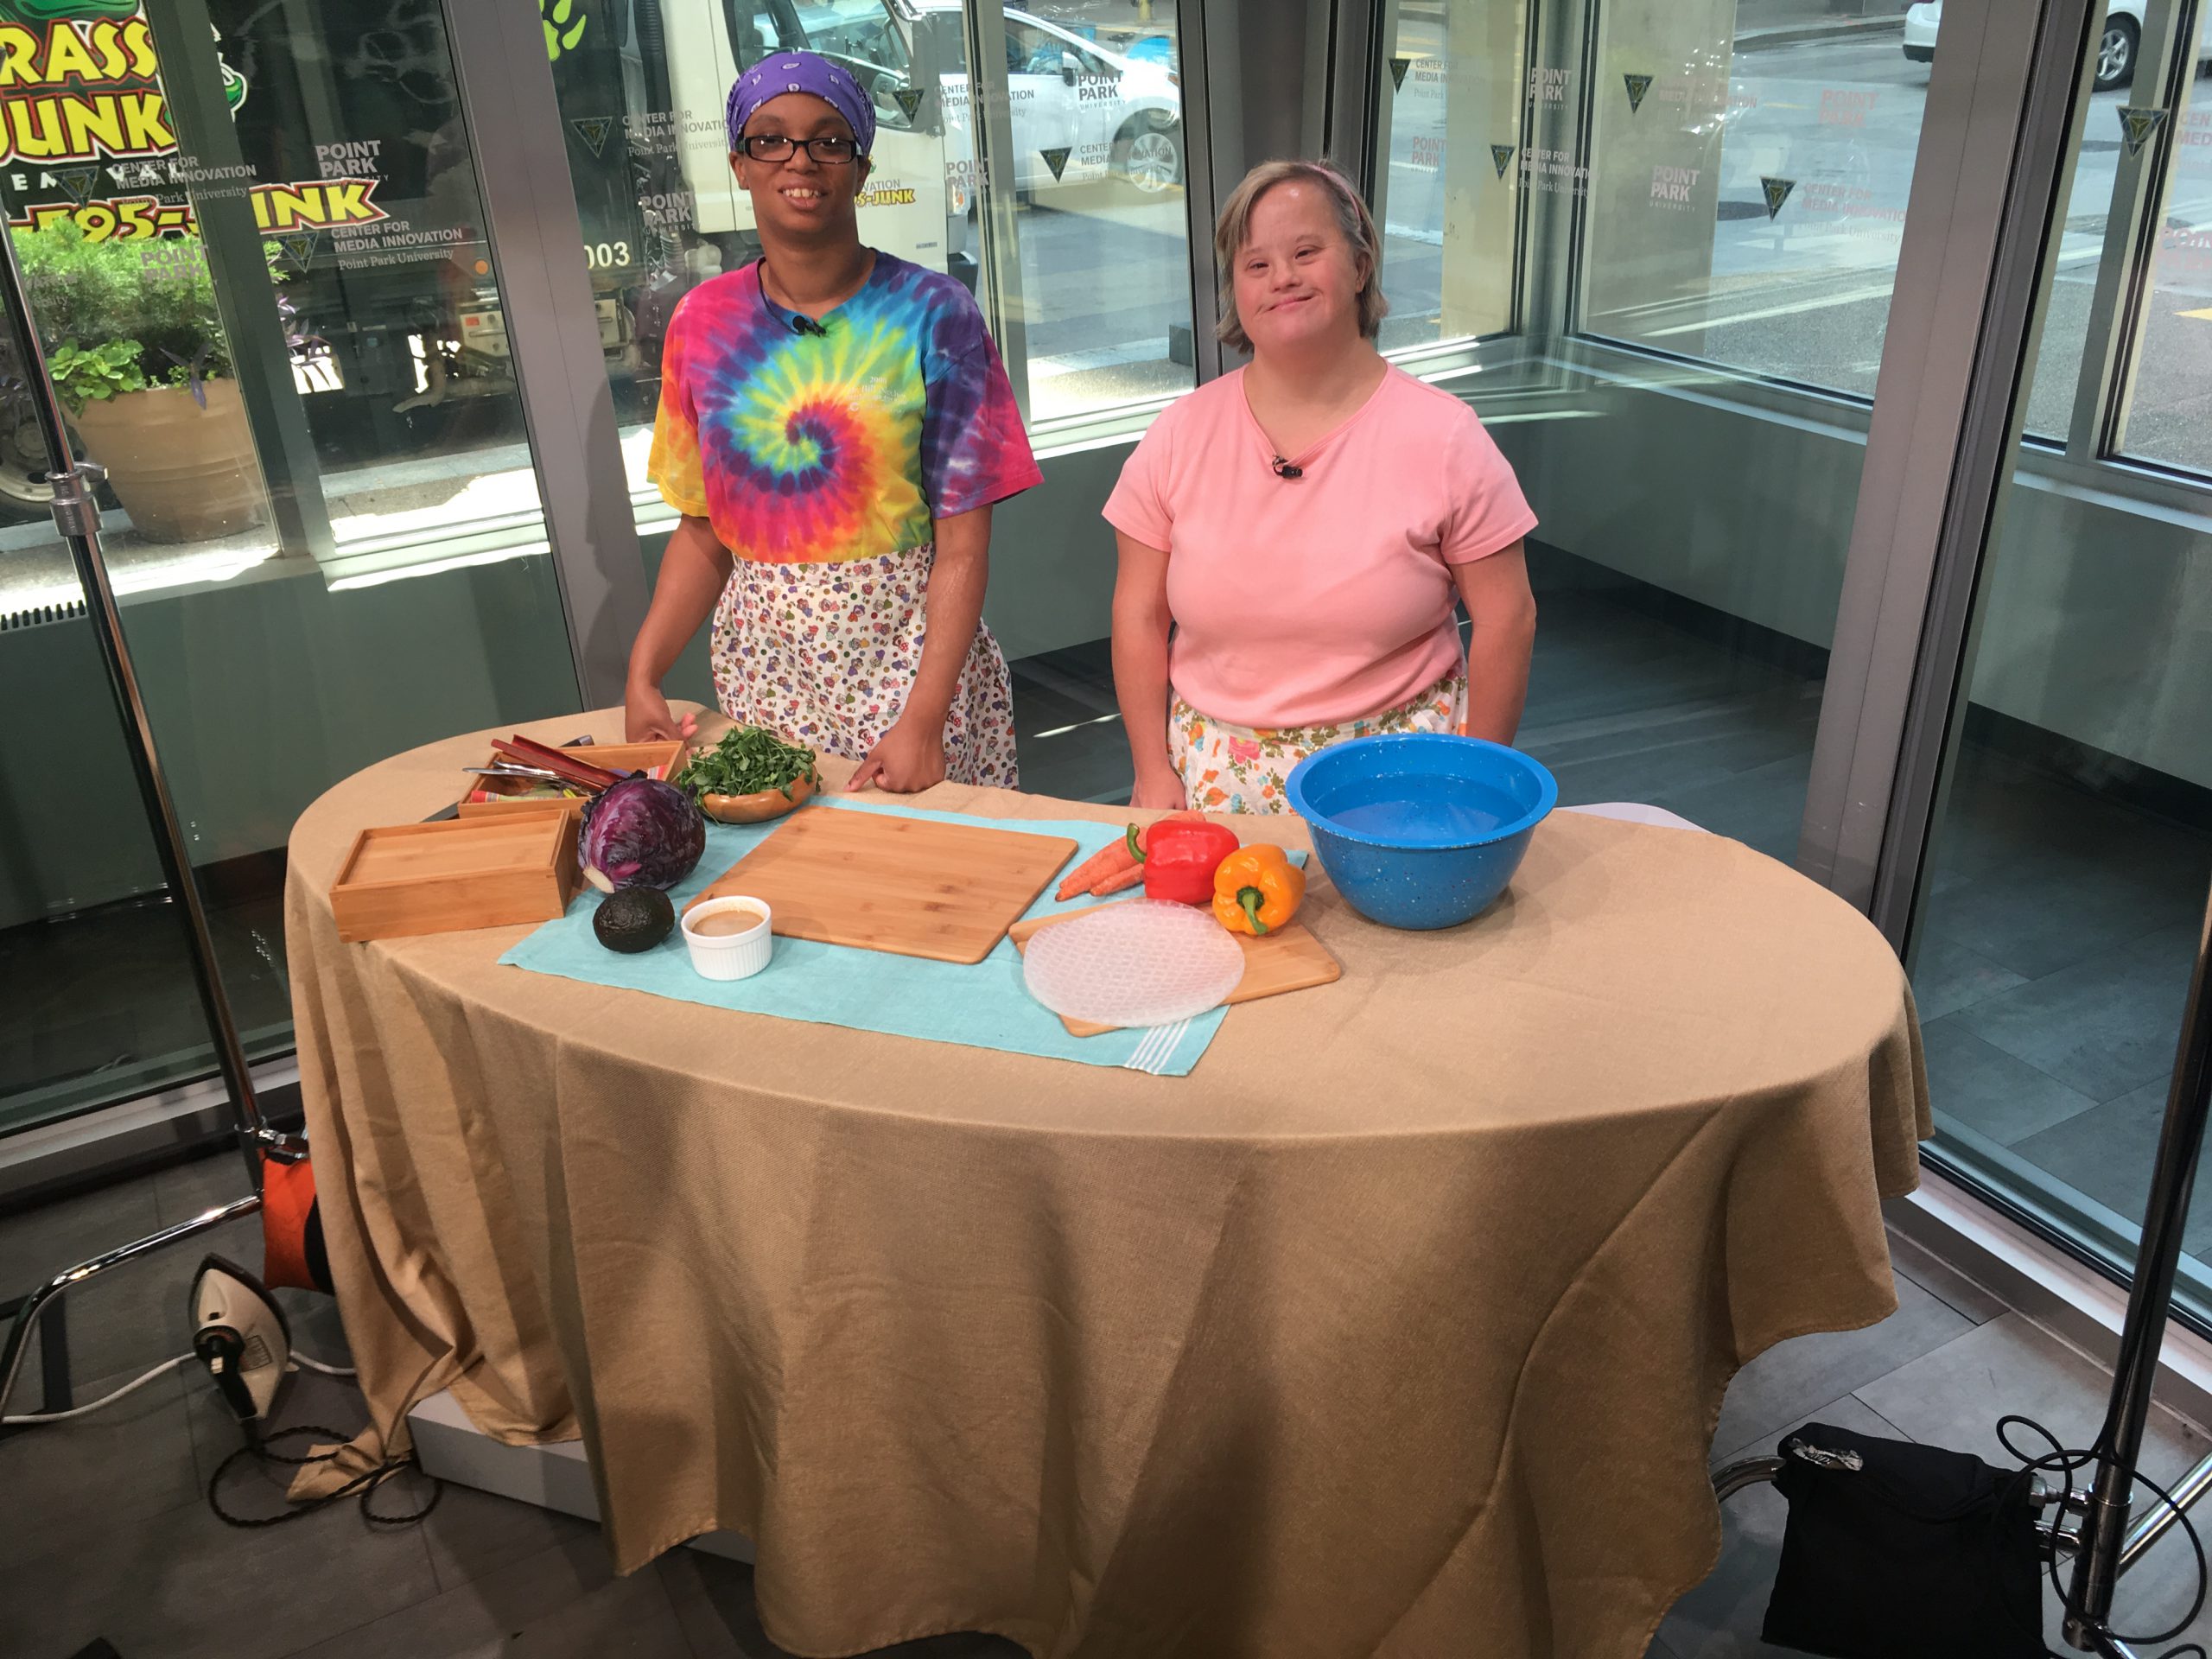 Two women stand behind a table with food ingredients on it, in the Center for Media Innovation's television studio. One woman is Black with black hair pulled back with a bandanna, and Is wearing a multi-colored tie-dye t-shirt and an apron. The other woman is white with short blonde hair, wearing a pink, short sleeved top, and an apron.